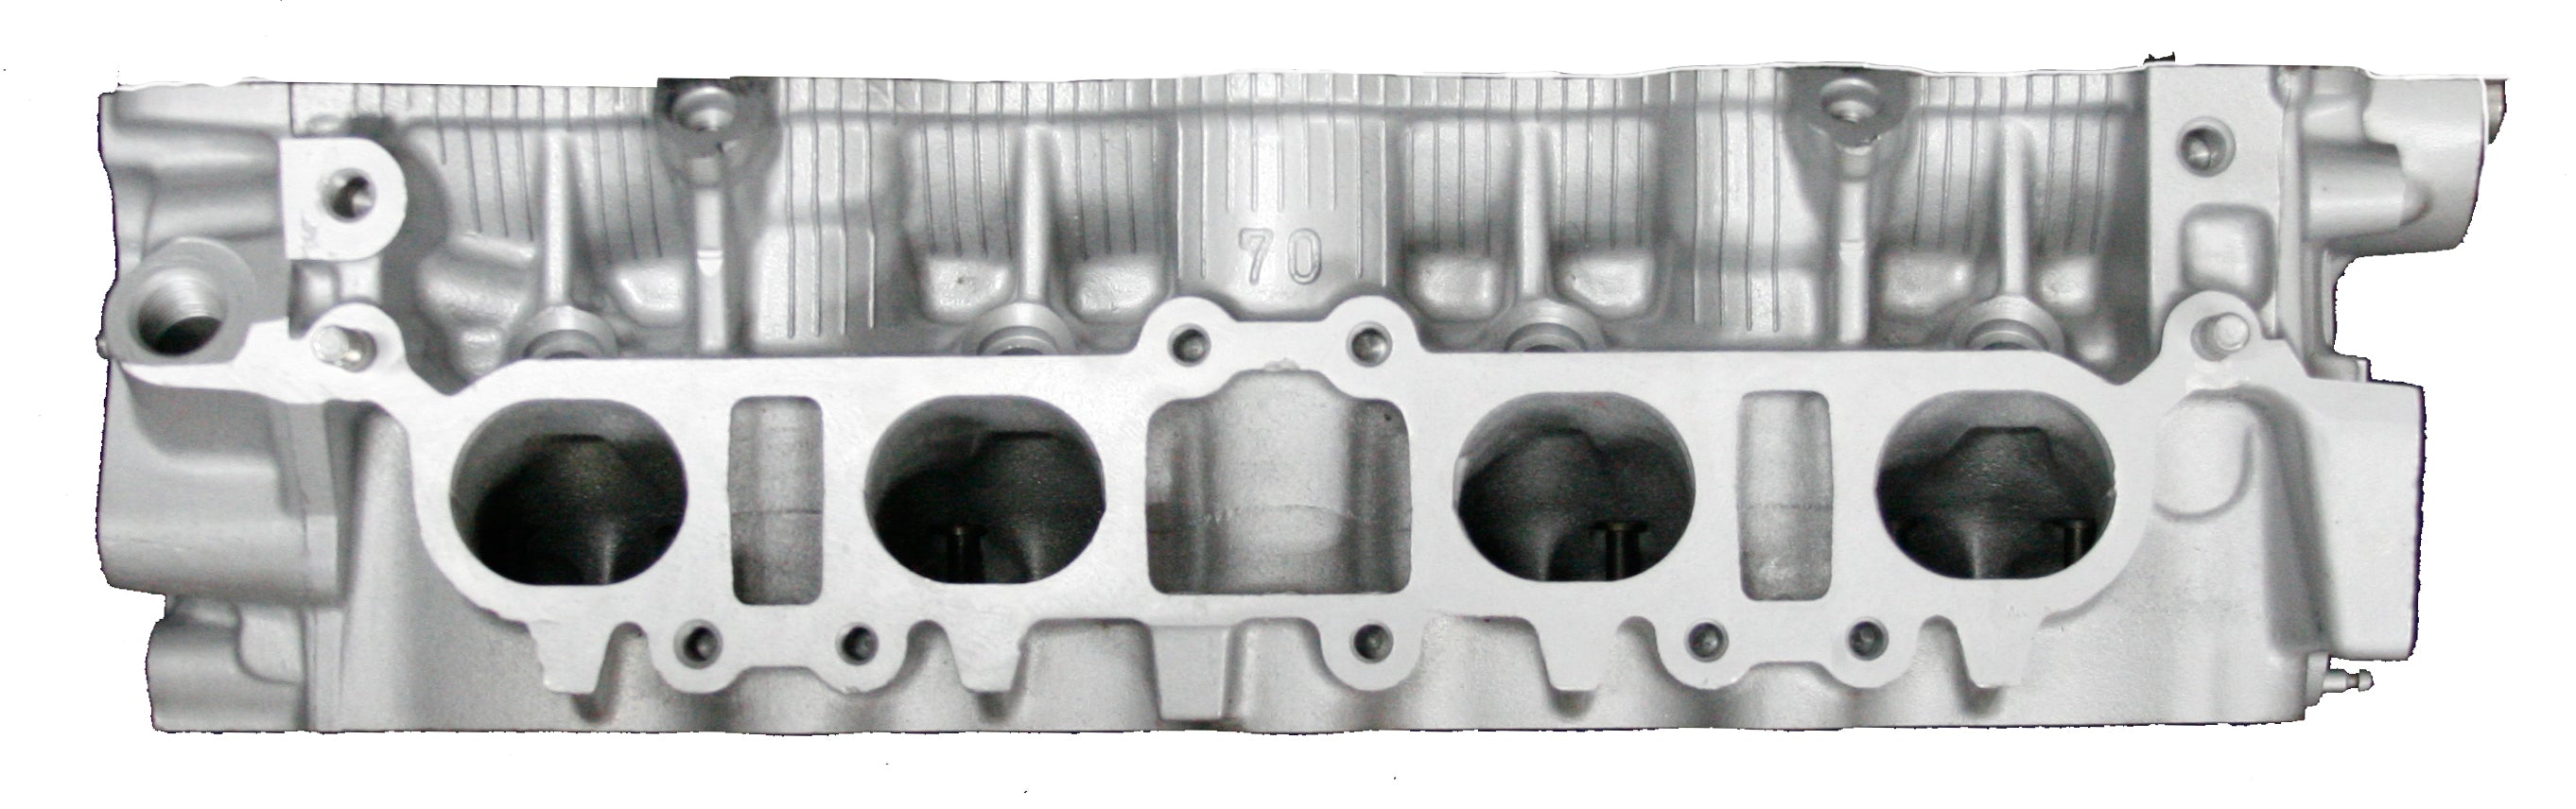 1991-1996 Toyota Camry Celica MR2 2.2L DOHC 5SFE Cylinder head casting # 70 or #38